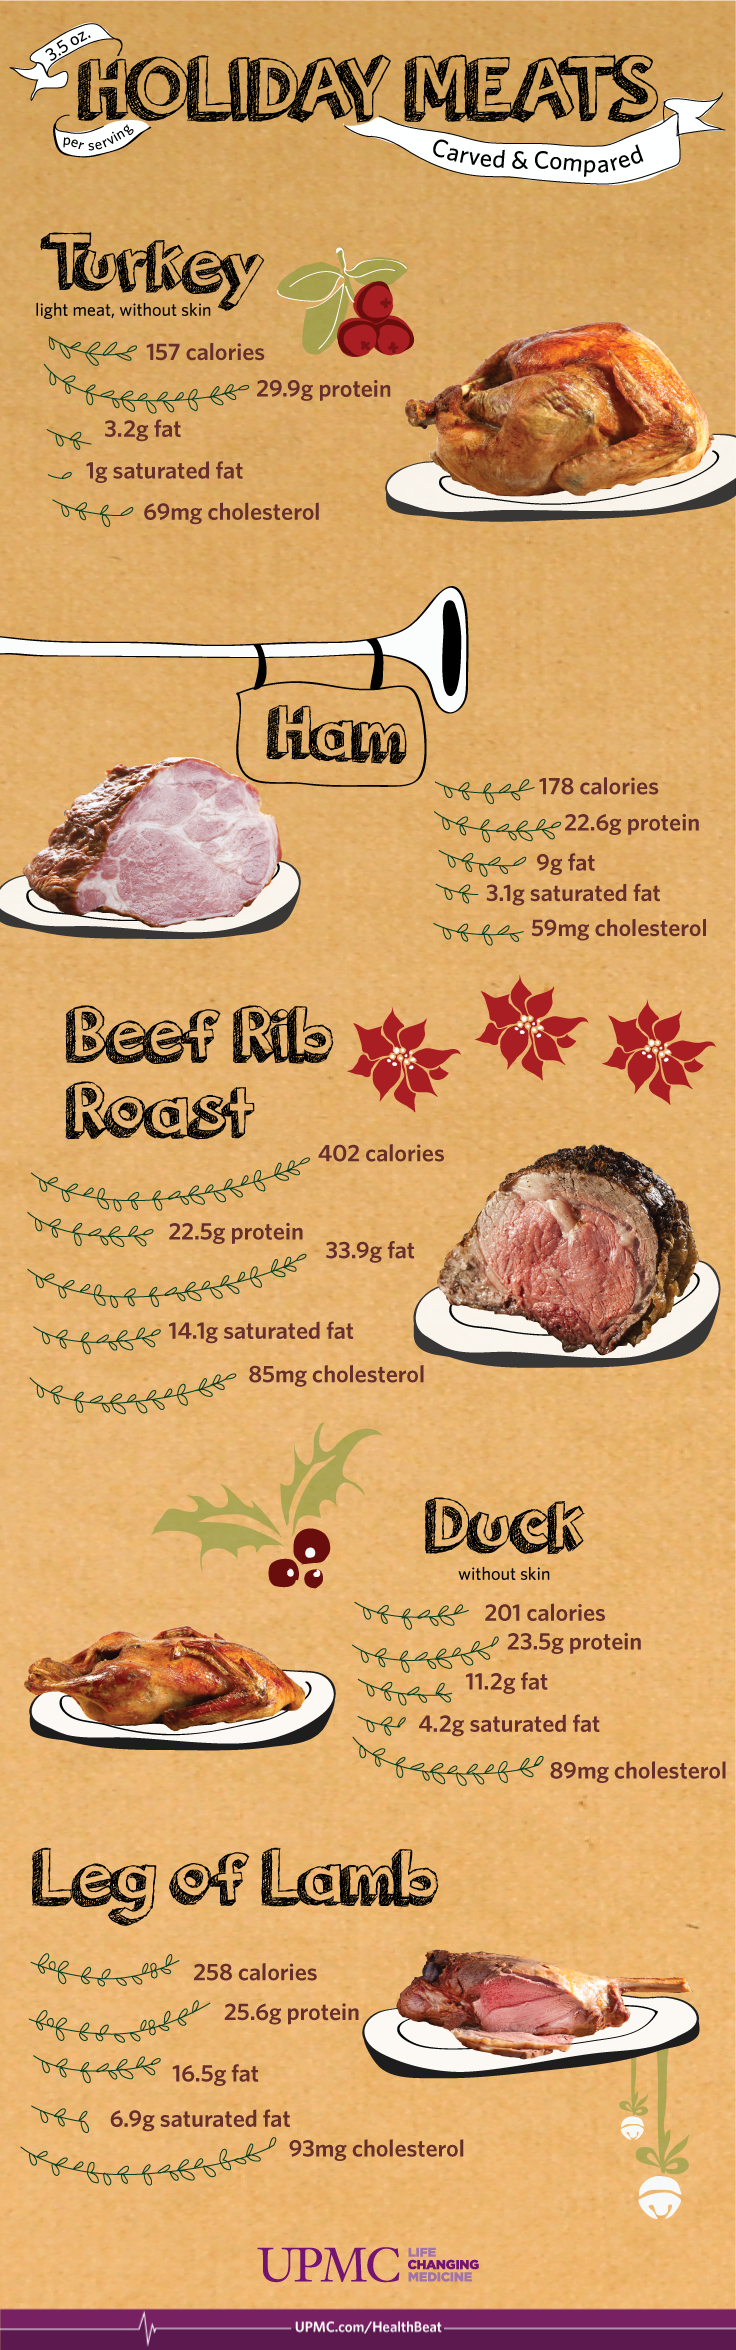 Make wise choices this holiday season by learning the nutritional breakdown of your favorite meat.